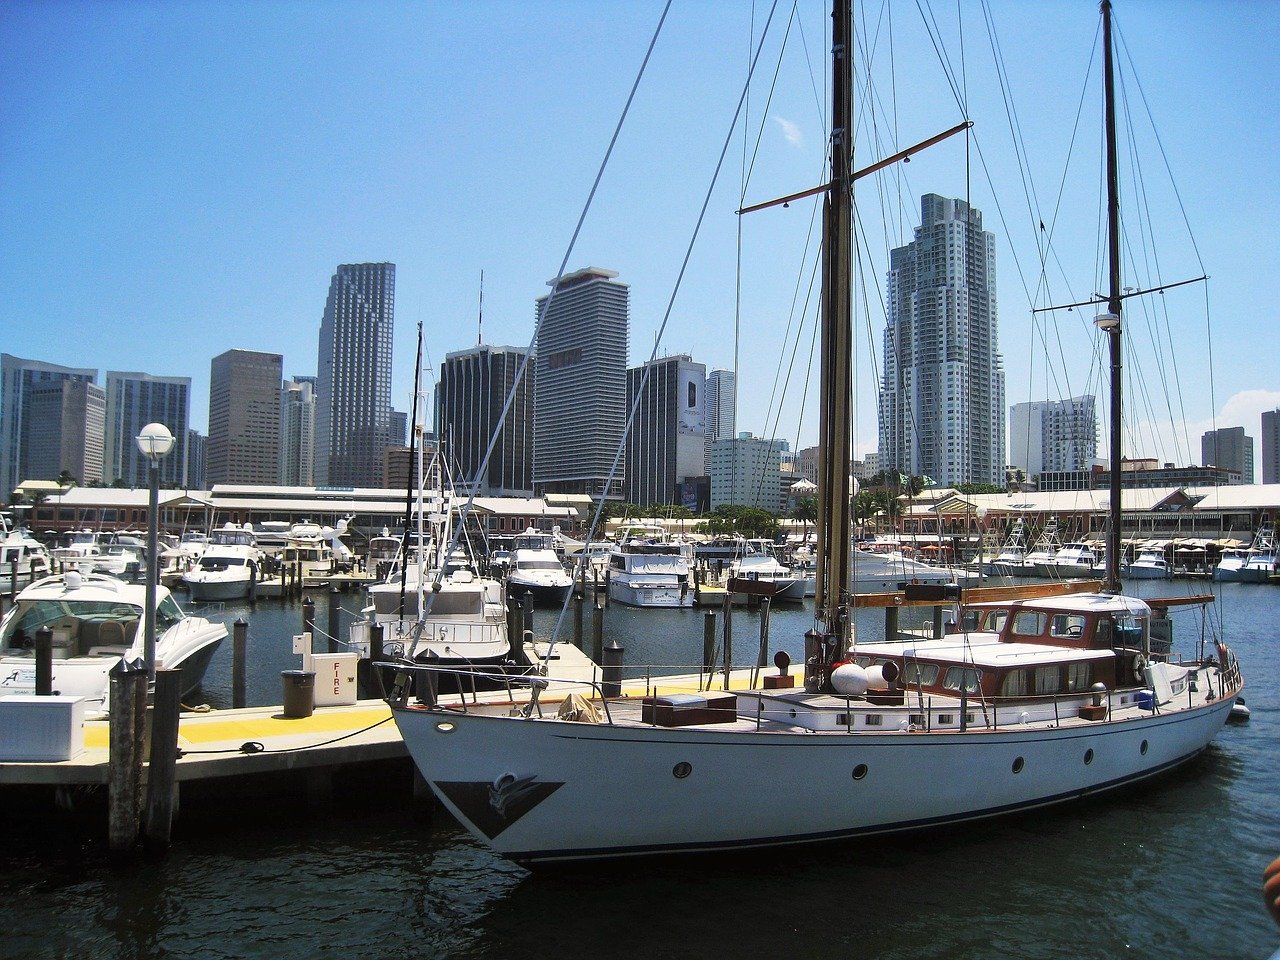 Picture of downtown Miami with its harbor and sailing boats